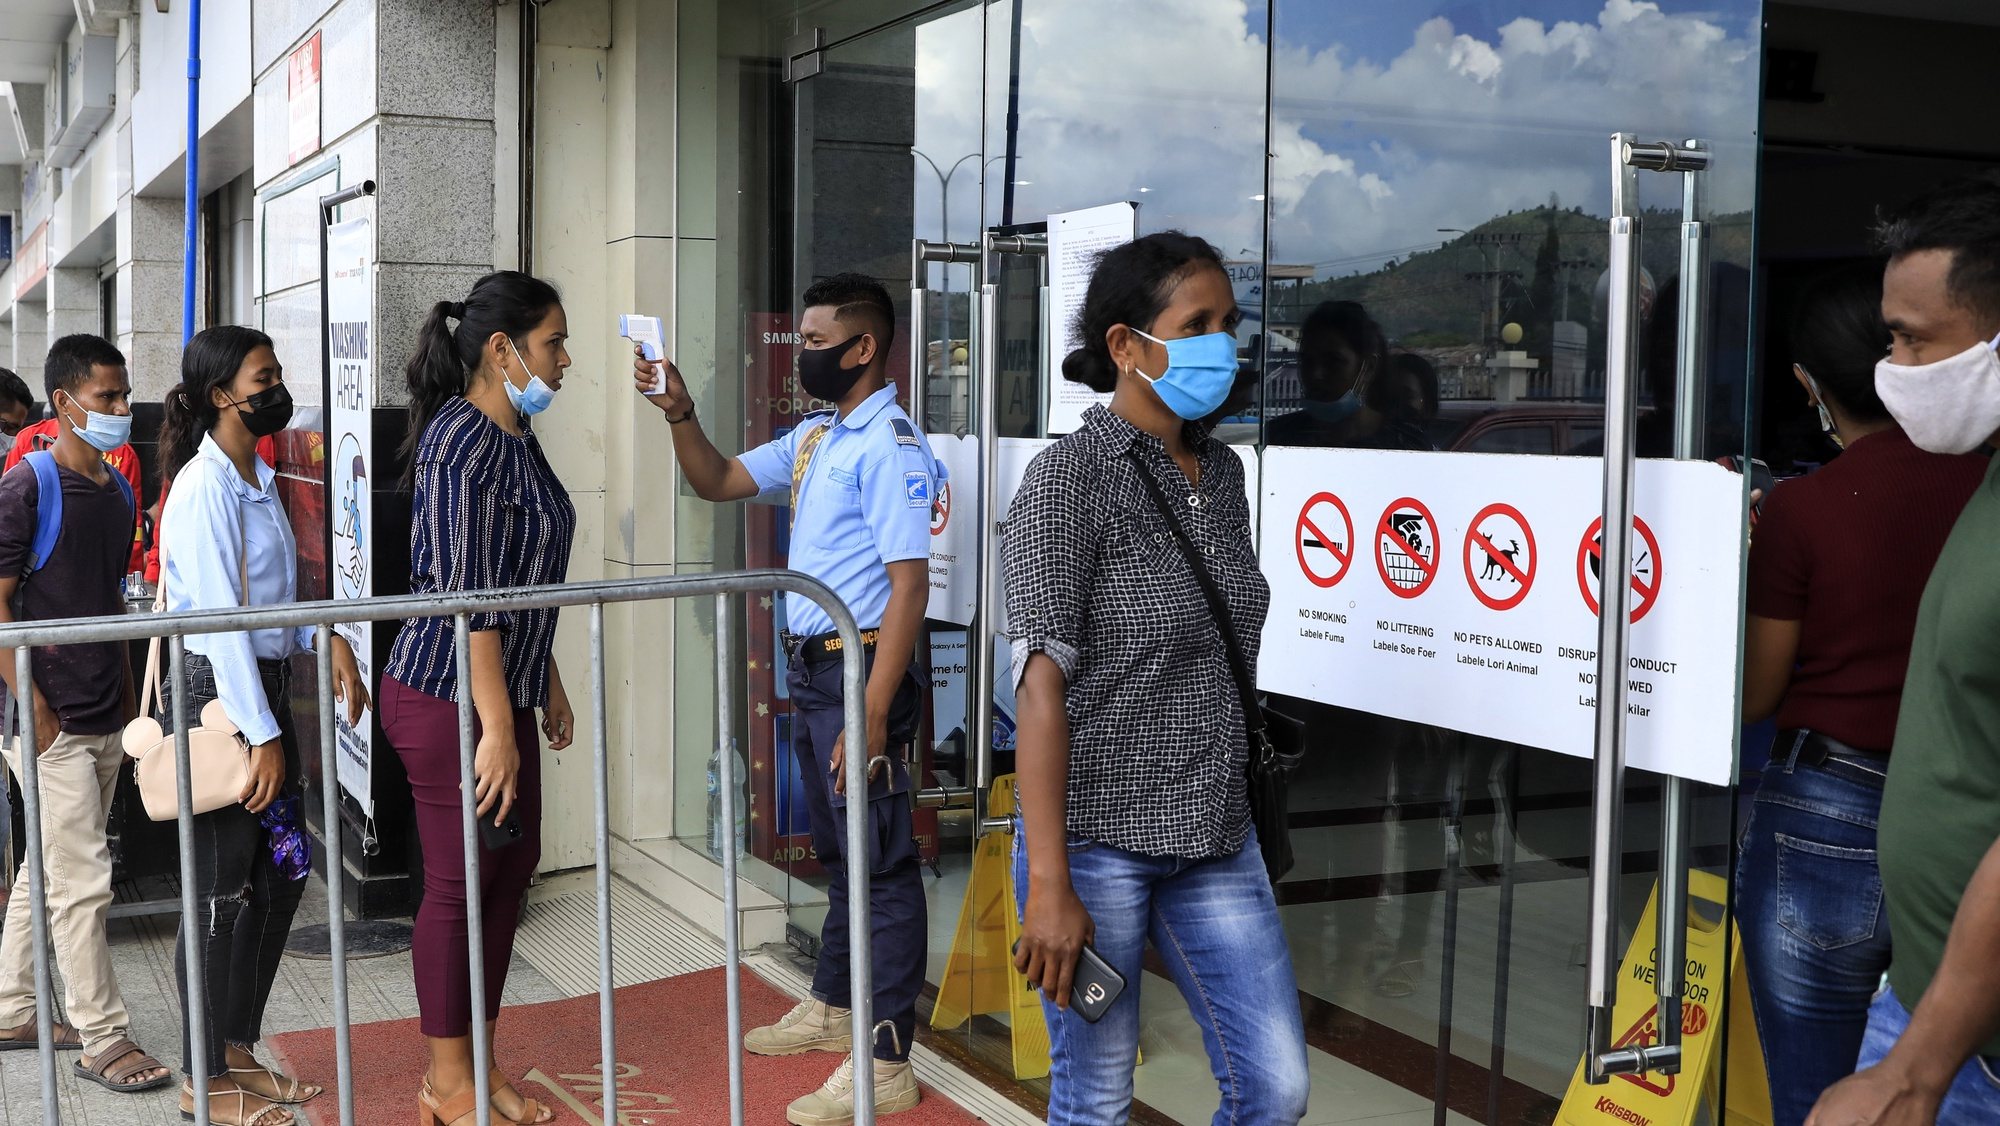 epa08936477 A security guard checks the body temperature of customers before they enter a shopping mall amid the ongoing COVID-19 disease pandemic in Dili, East Timor, also known as Timor Leste, 11 January 2021 (issued 14 January 2021). According to reports Timor Leste is considered successful in overcoming the pandemic and recorded as the second-smallest outbreak in Southeast Asia after Laos. Timor Leste has 49 cases with zero death while the neighbouring country Indonesia is struggling as one of the worst outbreaks in the region. The country imposed a state of emergency a week after the Catholic-majority nation reported its first case on 21 March 2020, and enforced strict border controls.  EPA/ANTONIO DASIPARU